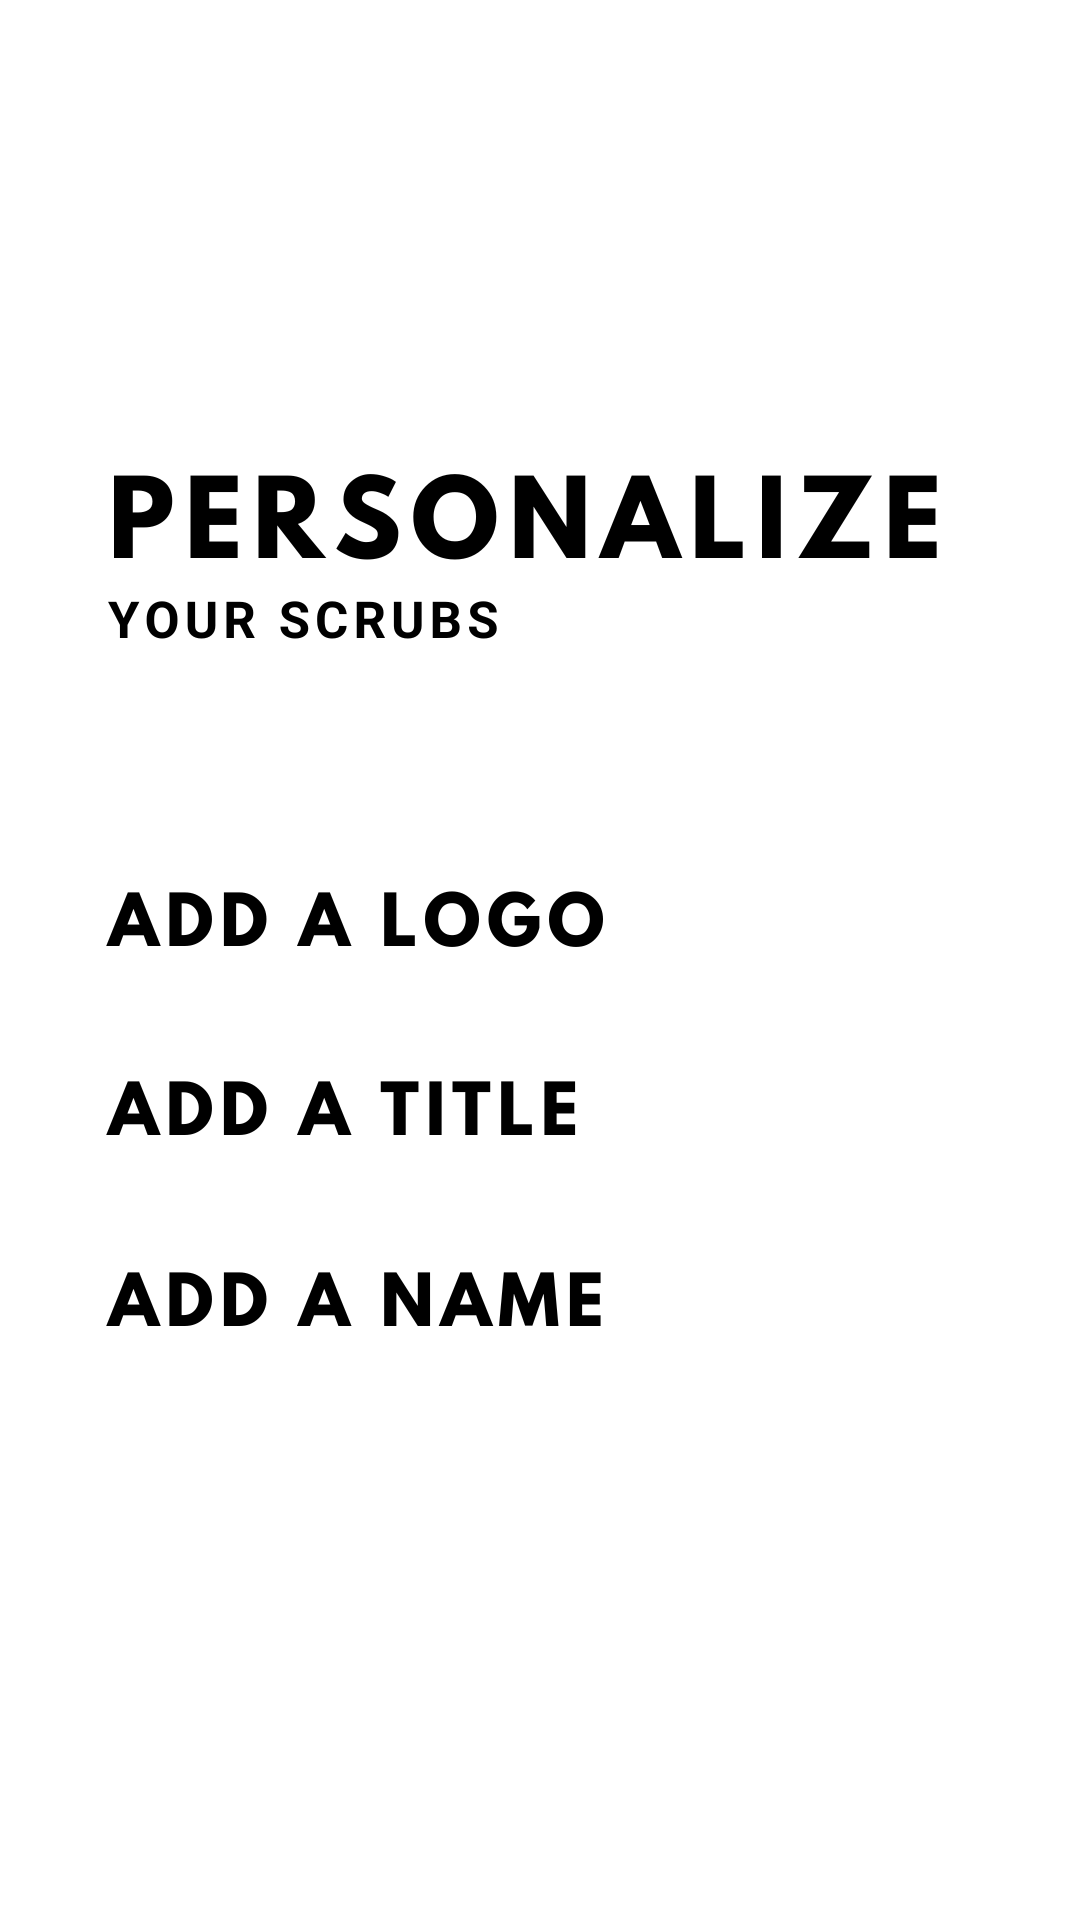 Embroidery - Personalize Your Scrubs